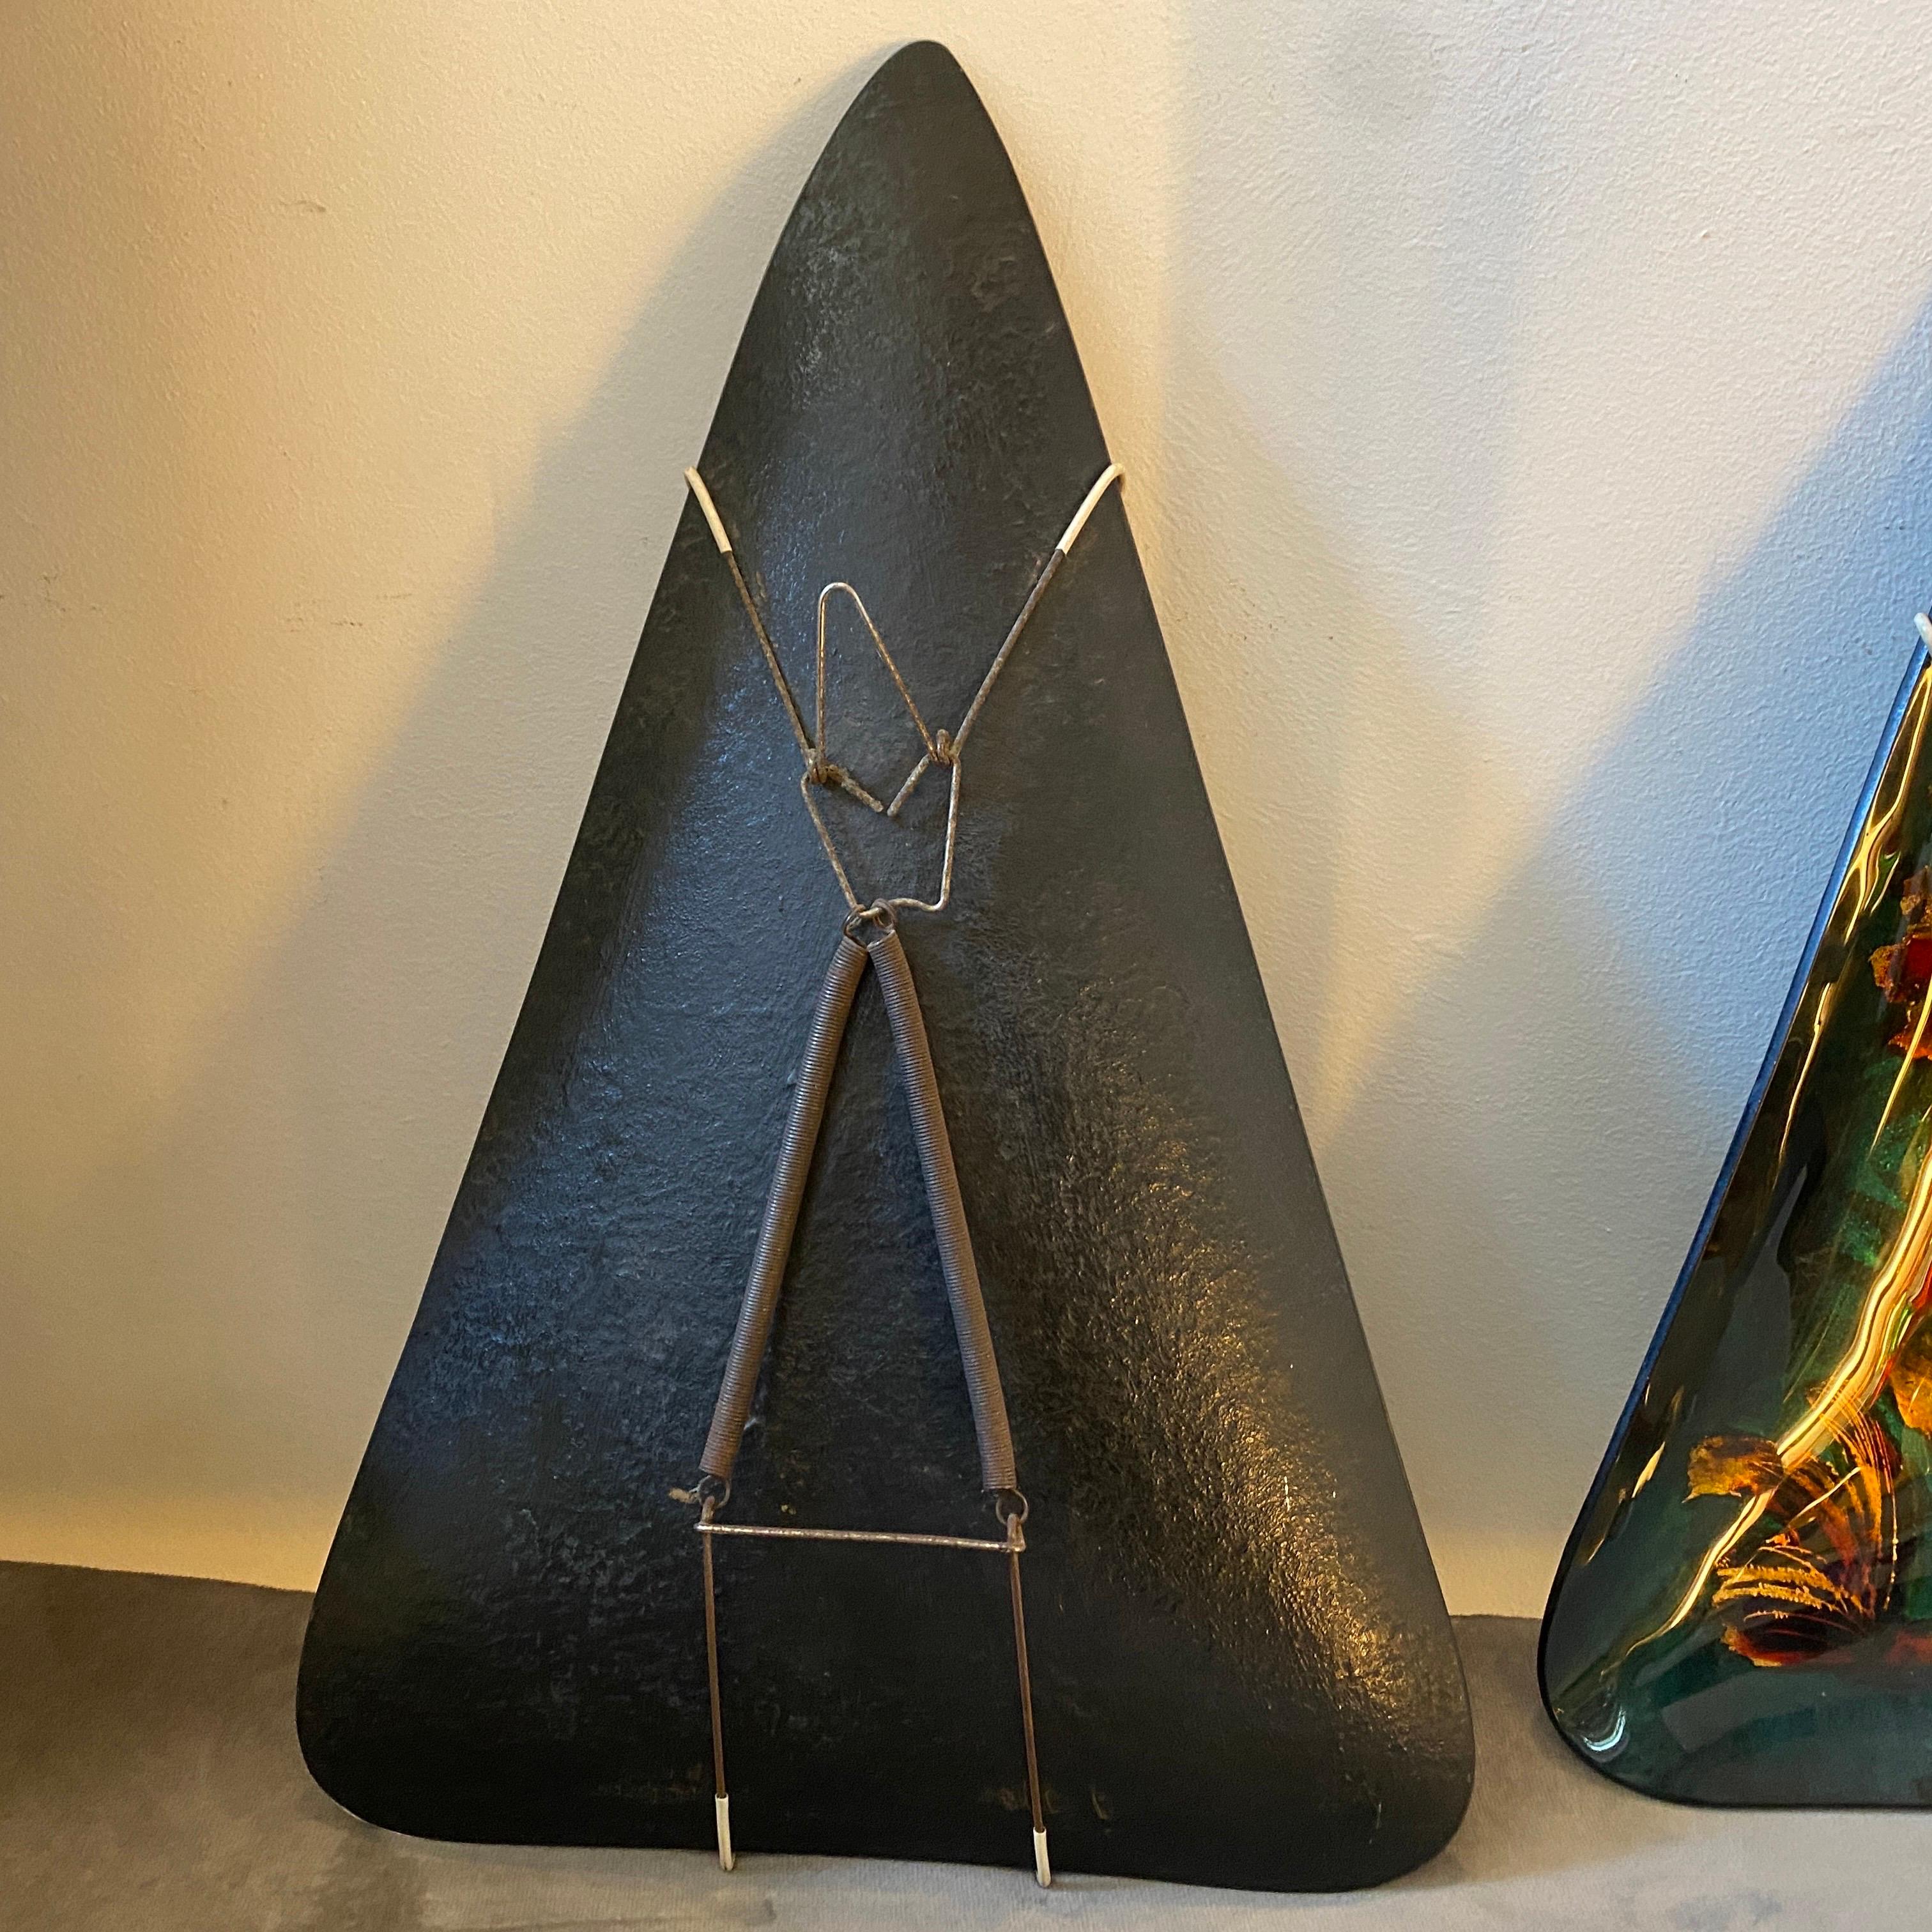 1950s, Set of Two Mid-Century Modern Paintings on Mural Triangular Glass Plates For Sale 5